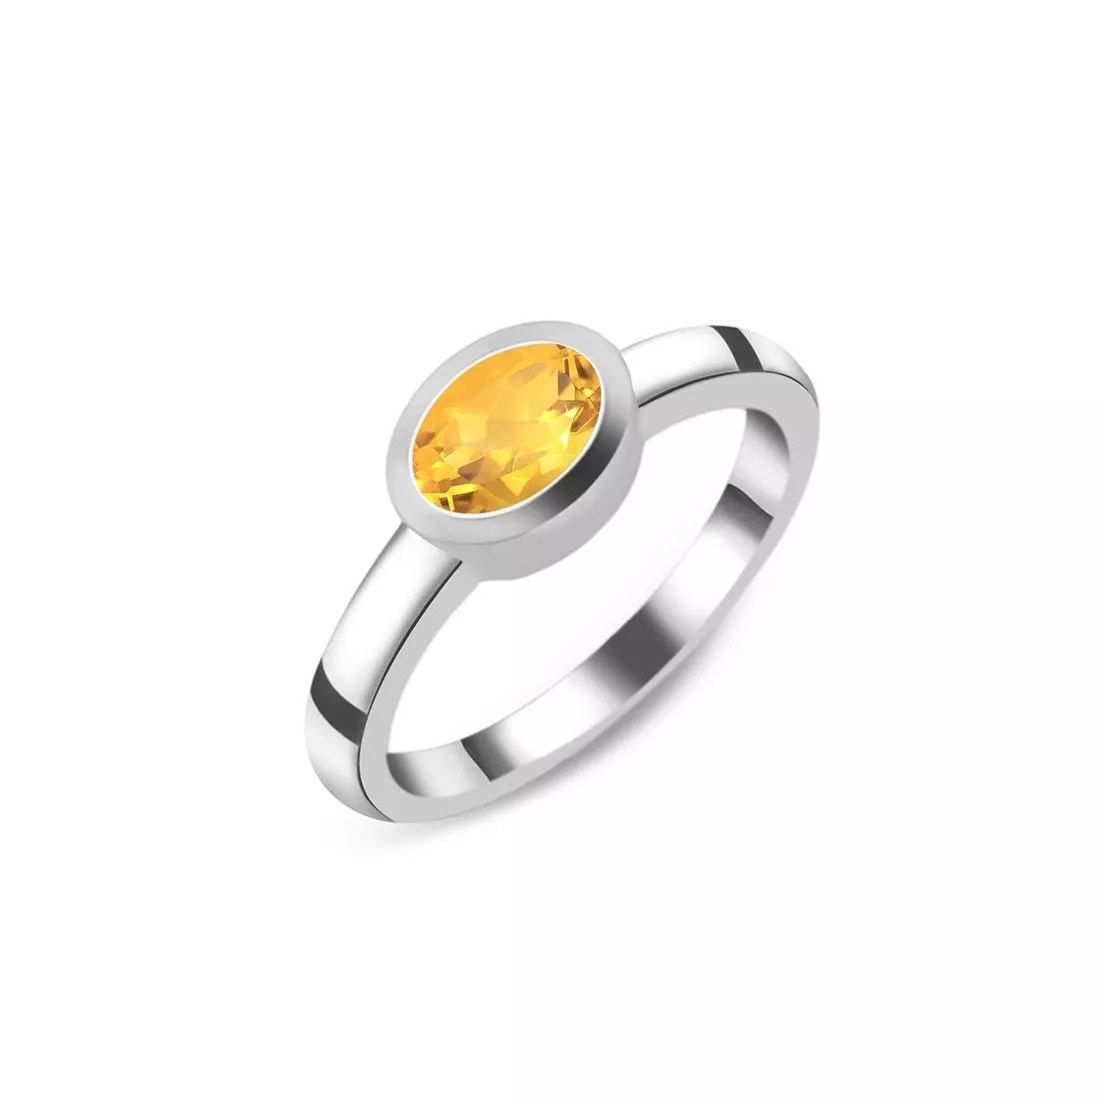 Buy Natural Citrine Jewelry At Affordable Price